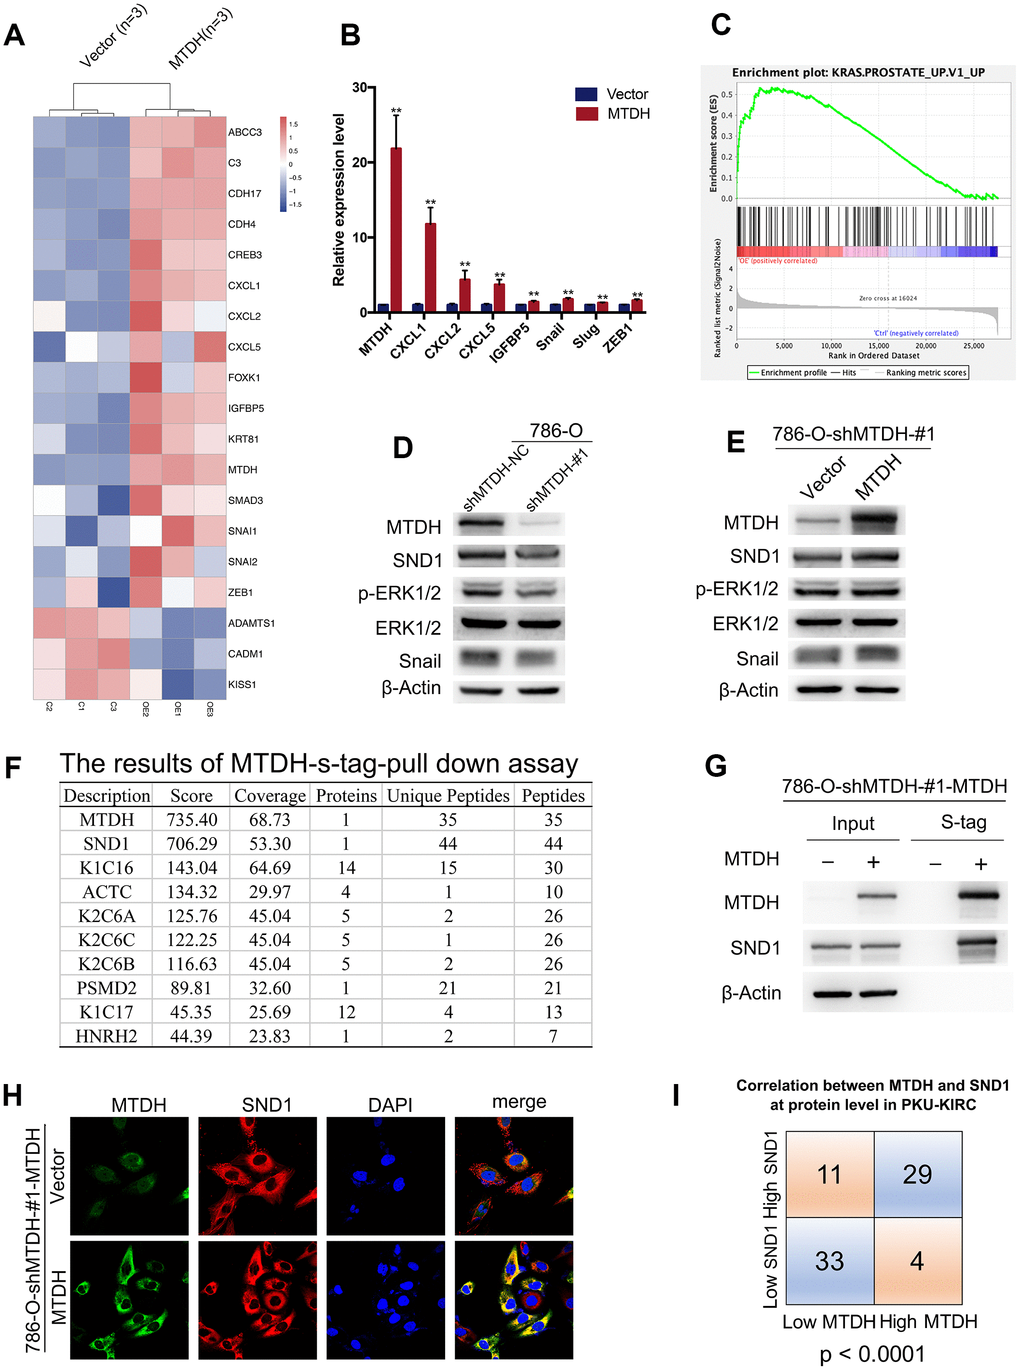 MTDH promotes metastasis by activating ERK signaling and EMT. (A) Heatmap representation of differentially expressed genes identified by RNA-Seq between 786-O-shMTDH-#1-MTDH cells (n = 3) and 786-O-shMTDH-#1-vector Control cells (n = 3). (B) Validation of differentially expressed genes by RT-qPCR. Comparison of mRNA expression of genes in pathways of cancer (CXCL1/2/5 and IGFBP5) and genes in EMT-related pathway (Snail, Slug and ZEB1) between 786-O—shMTDH-#1-MTDH cells and 786-O—shMTDH-#1-vector Control cells. All data are shown as means ± SD. (C) Based on our own RNA sequencing data, genes influenced by MTDH overexpression were mostly enriched in pathways involved with KRAS signaling using Gene Set Enrichment Analysis (GSEA) pathway analysis. (D) Silencing MTDH reduced the protein expression of p-ERK1/2, Snail and SND1 in ccRCC cells. (E) Overexpressing MTDH increased the protein expression of p-ERK1/2, Snail and SND1 in ccRCC cells. (F) The result of mass spectrometry analysis of s-tag pull down assay confirm the interaction between MTDH and SND1 at the protein level. (G) MTDH and SND1 were co-localized, mainly in the cytoplasm. (H) The result of immunoprecipitation revealed that MTDH binds to SND1 at the protein level. (I) The correlation of MTDH and SND1in PKU-KIRC dataset was statistically analyzed (P